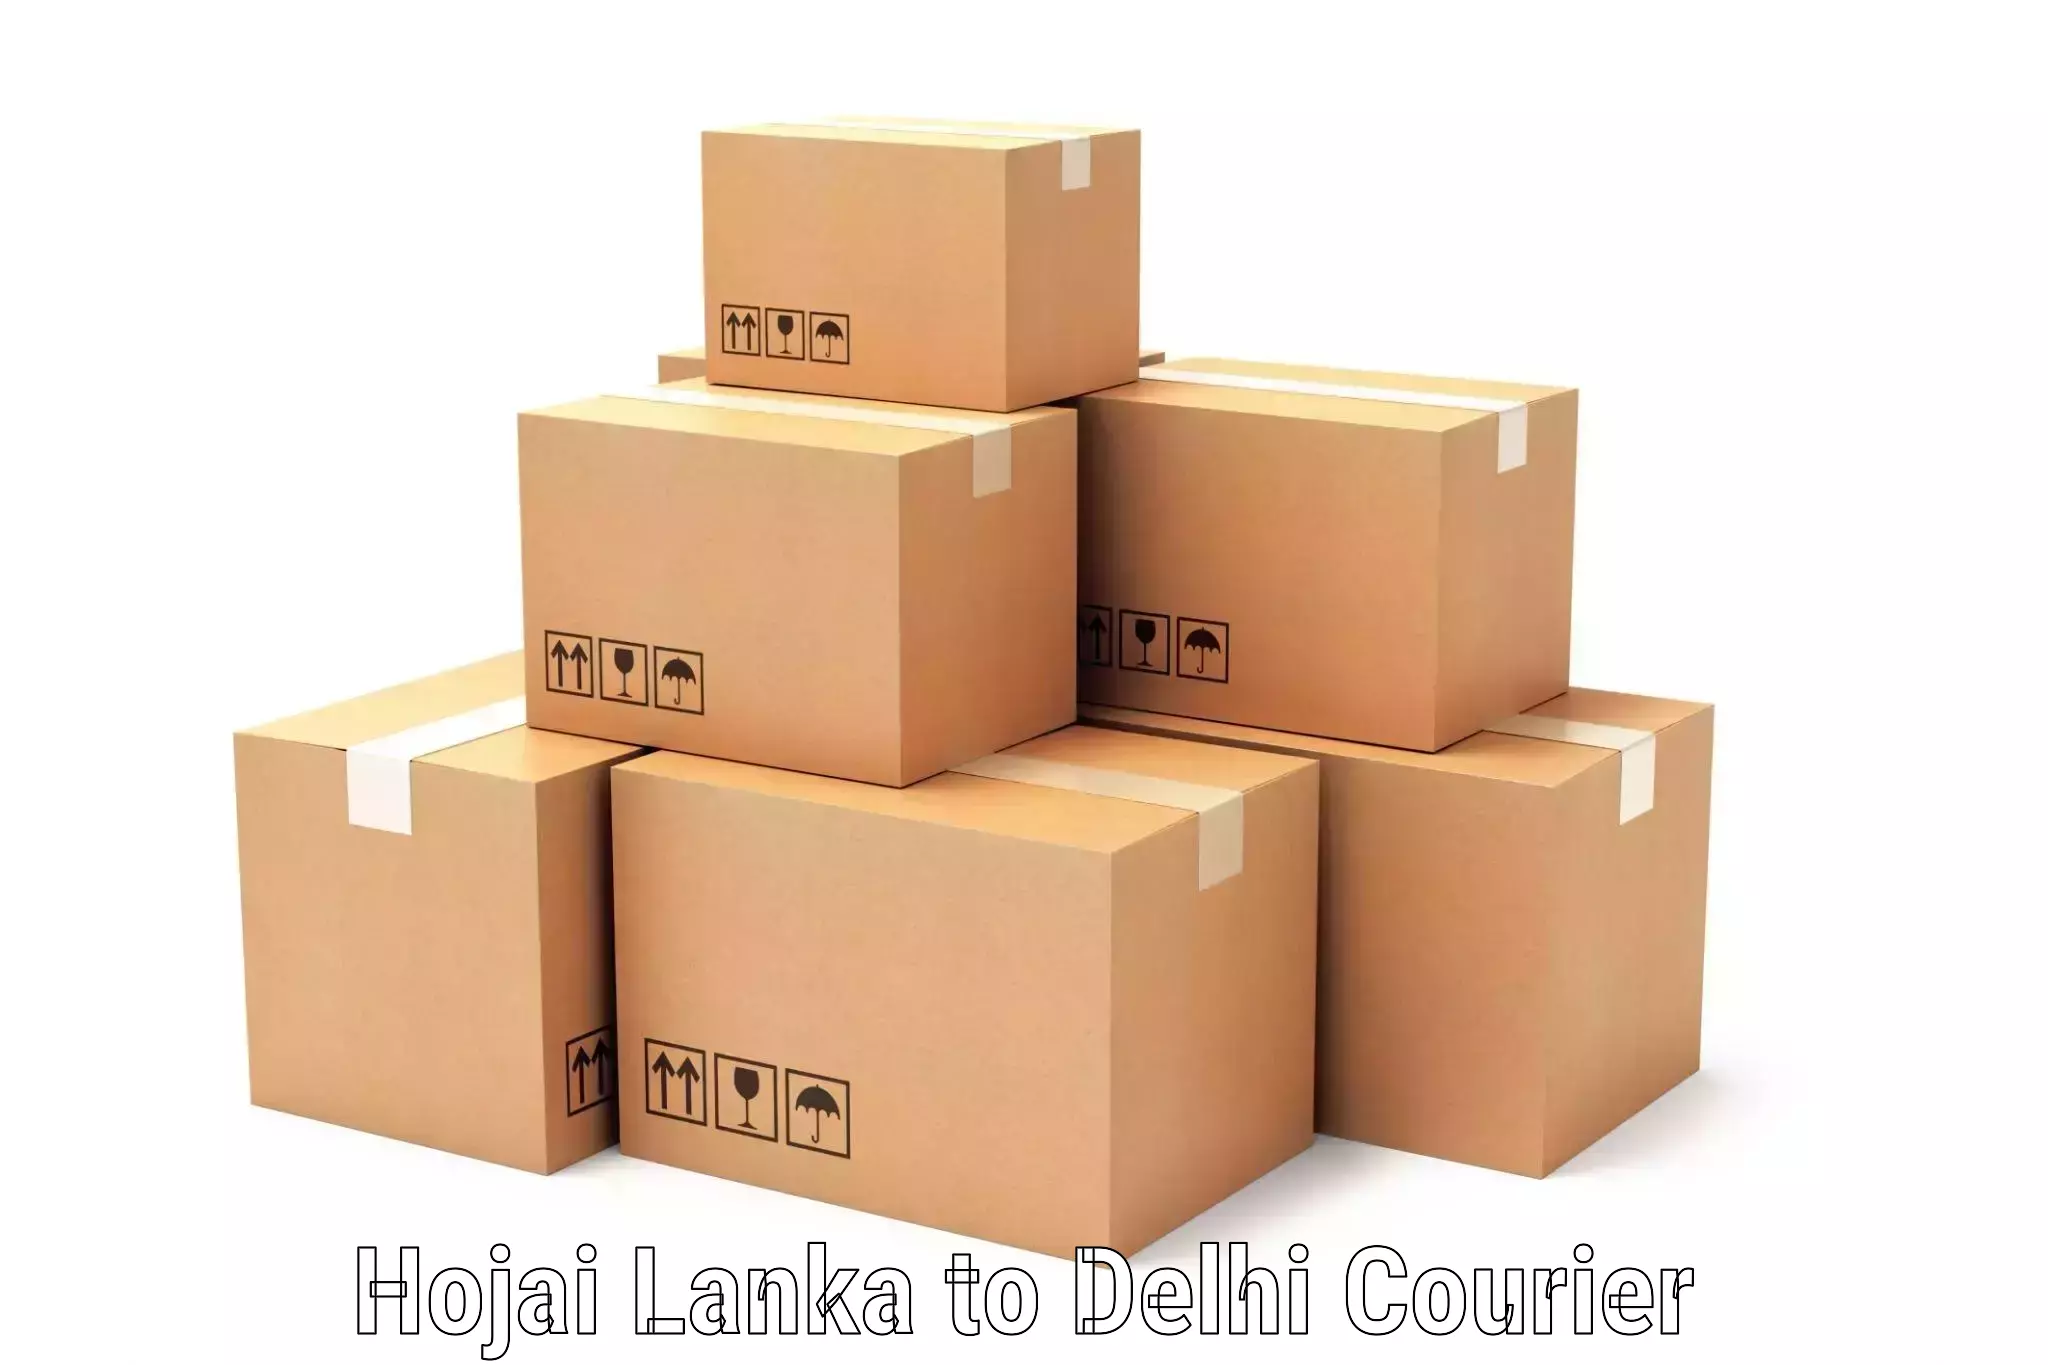 Express courier capabilities Hojai Lanka to Lodhi Road